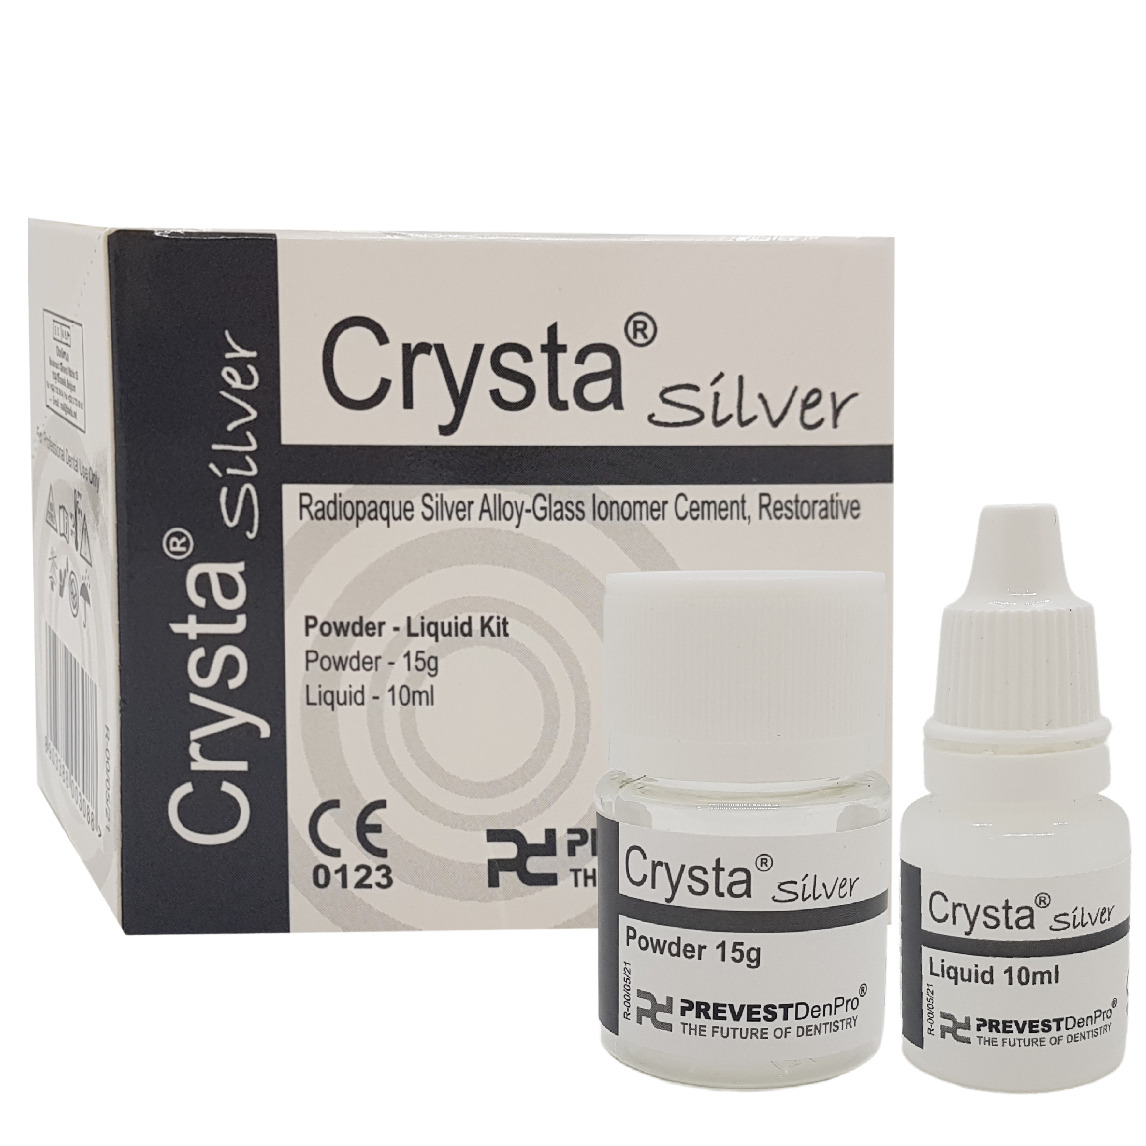 Prevest Denpro Crysta Silver Radiopaque Glass Ionomer Cement (Miracle Mix)